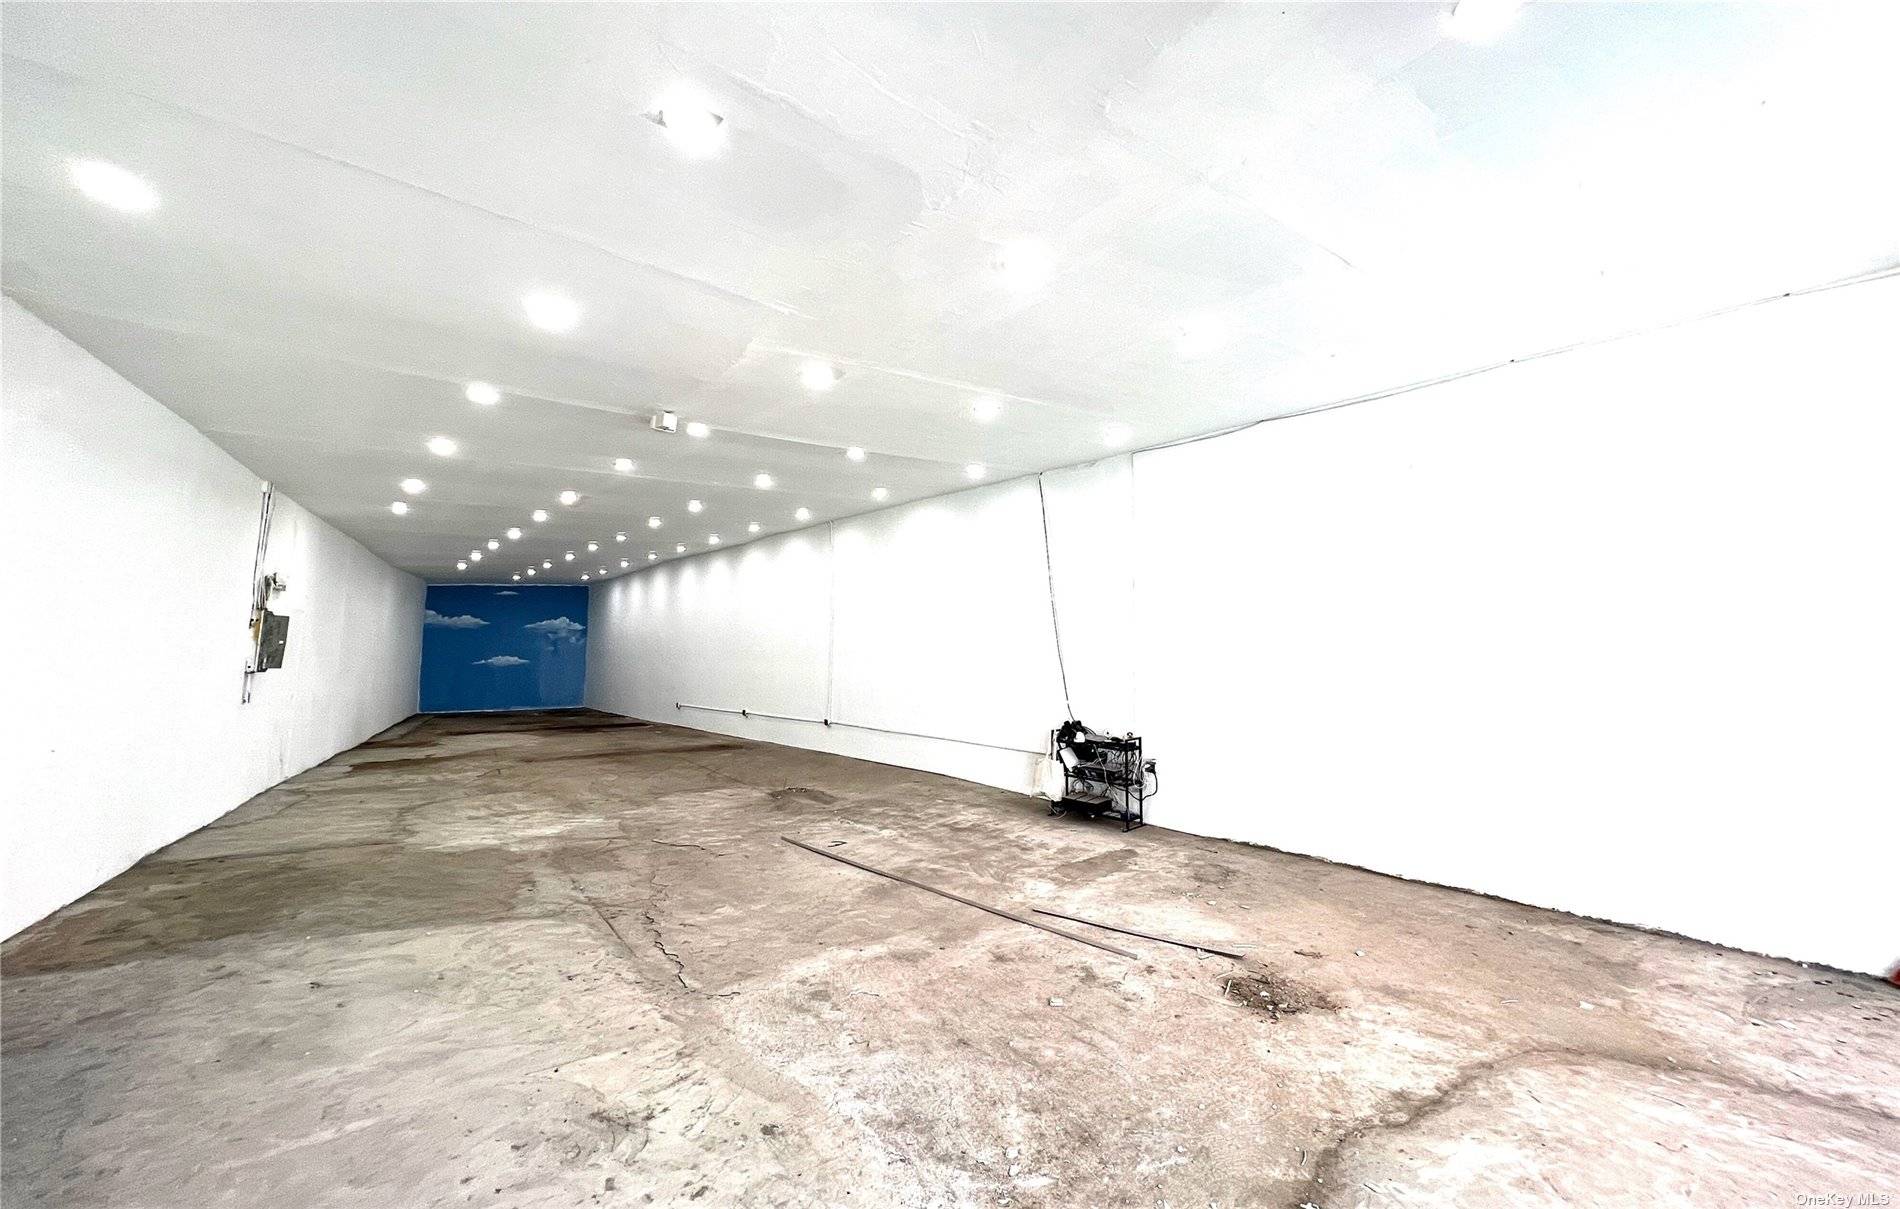 Gorgeous 3000 SF Retail Showroom with office or storage space with high Ceilings with recessed lighting throughout.